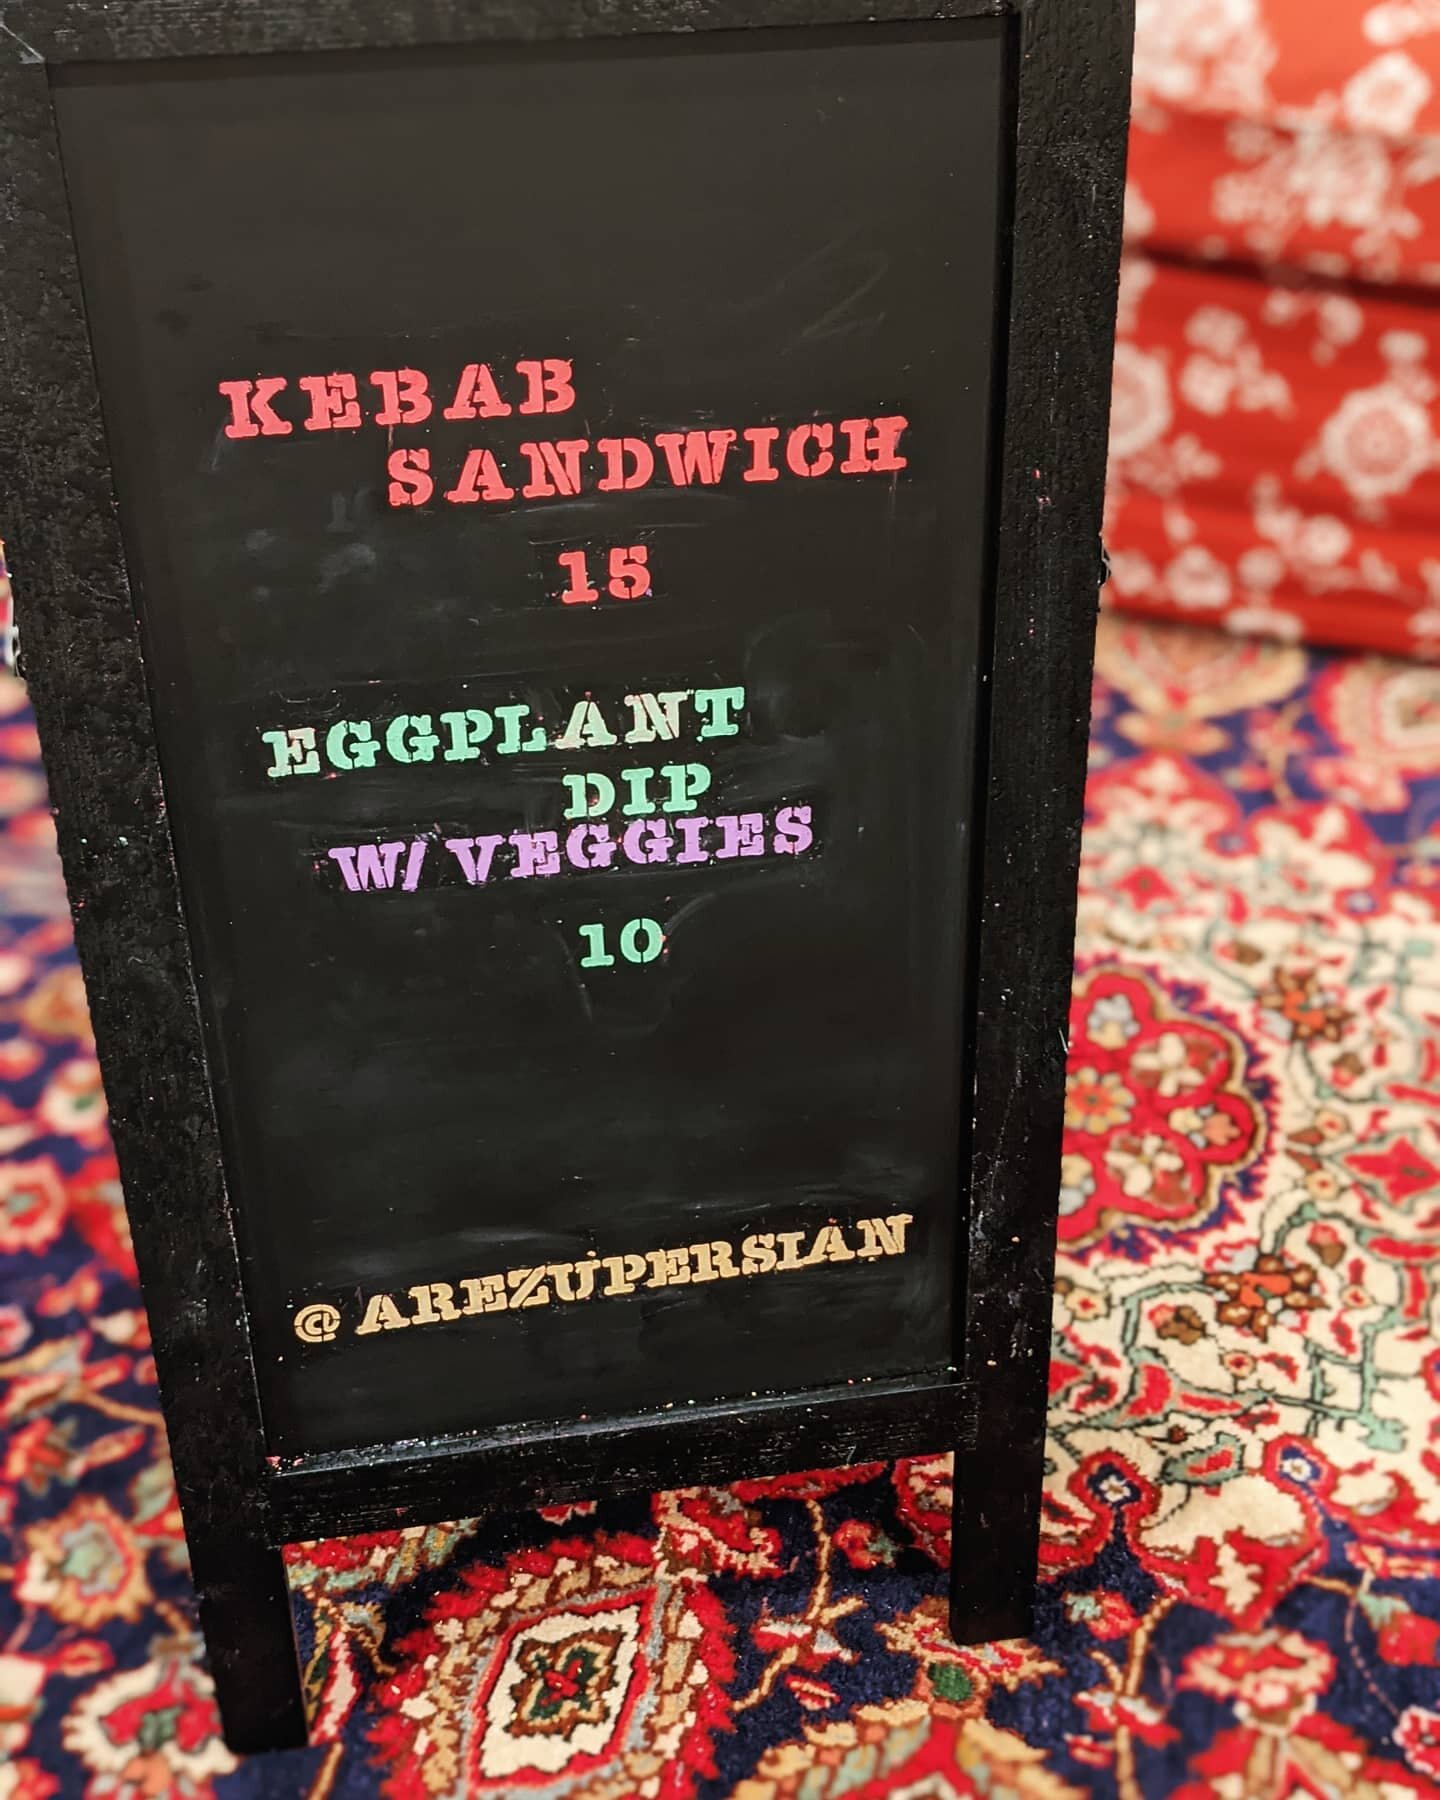 We are busy setting up for @brewdogusa Annual General Mayhem! 
.
.
We will be slinging vegan kebab sandwiches, and unveiling a new menu item: a vegan version of Kashk Bademjan (eggplant dip)!
.
.
Anyone we know gonna be there?